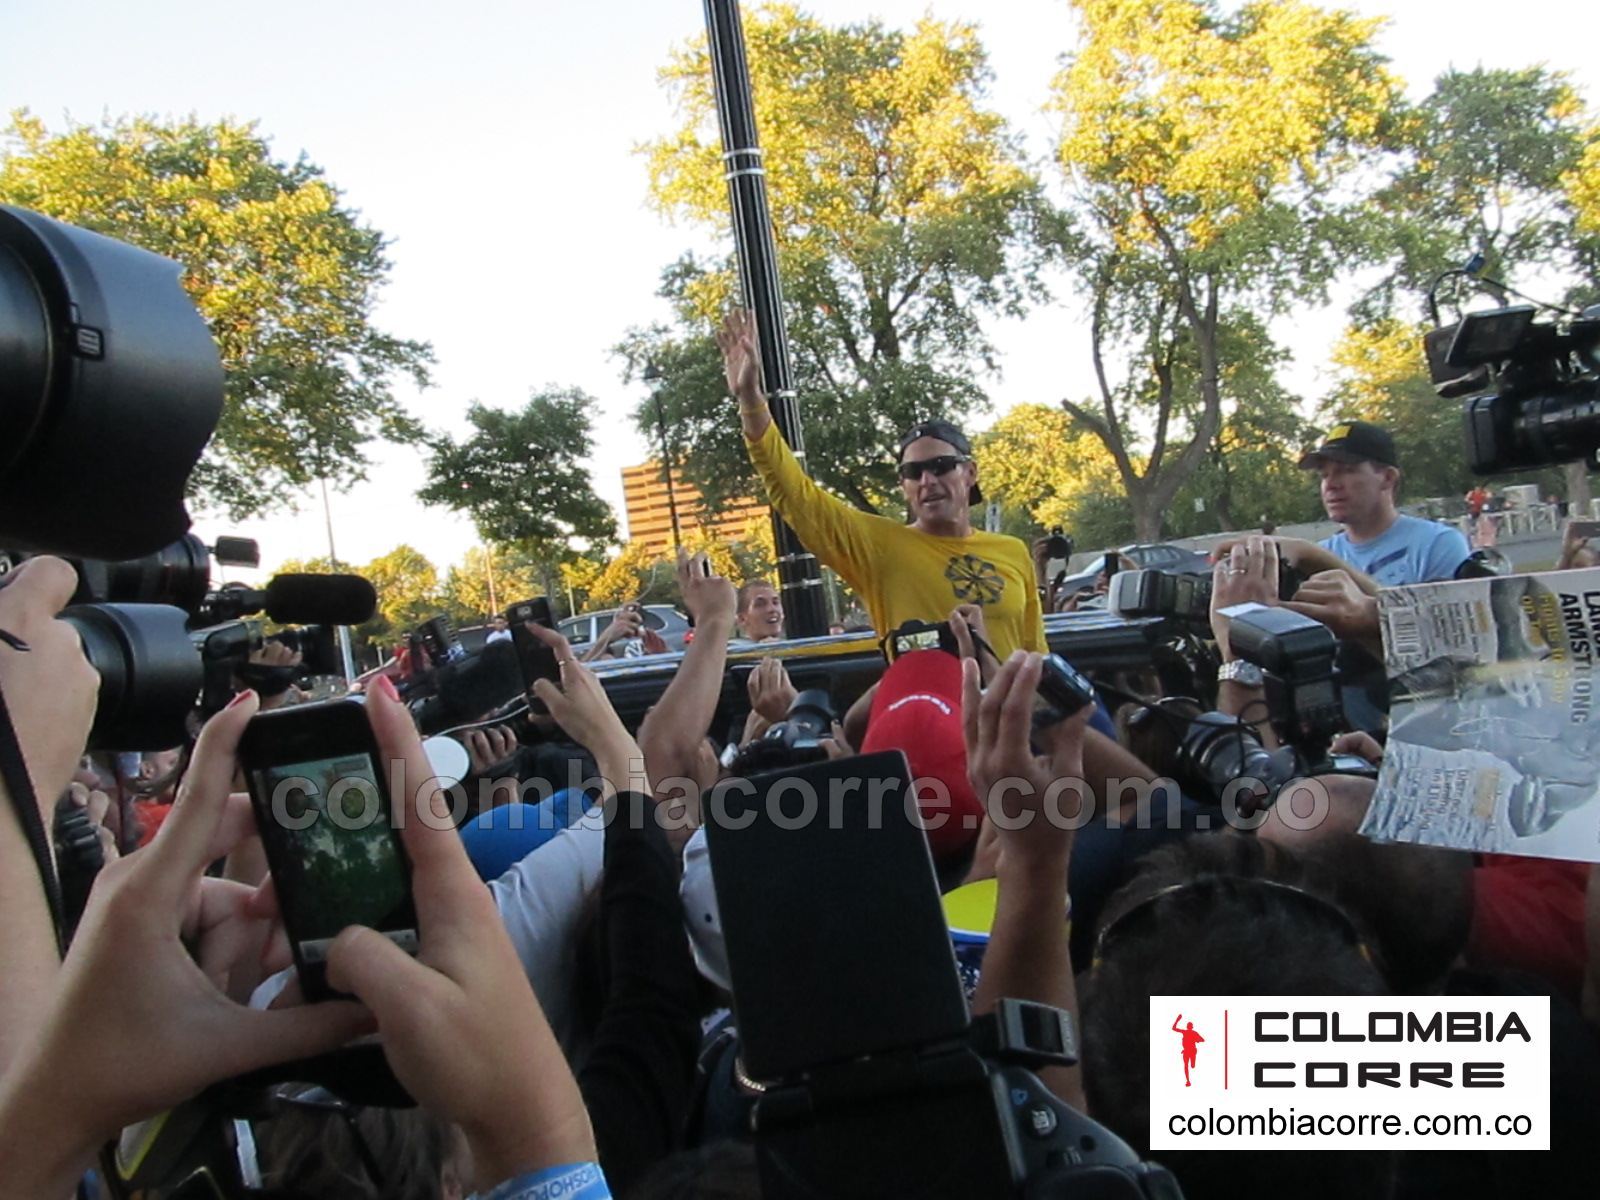 lance armstrong mont royal colombia corre